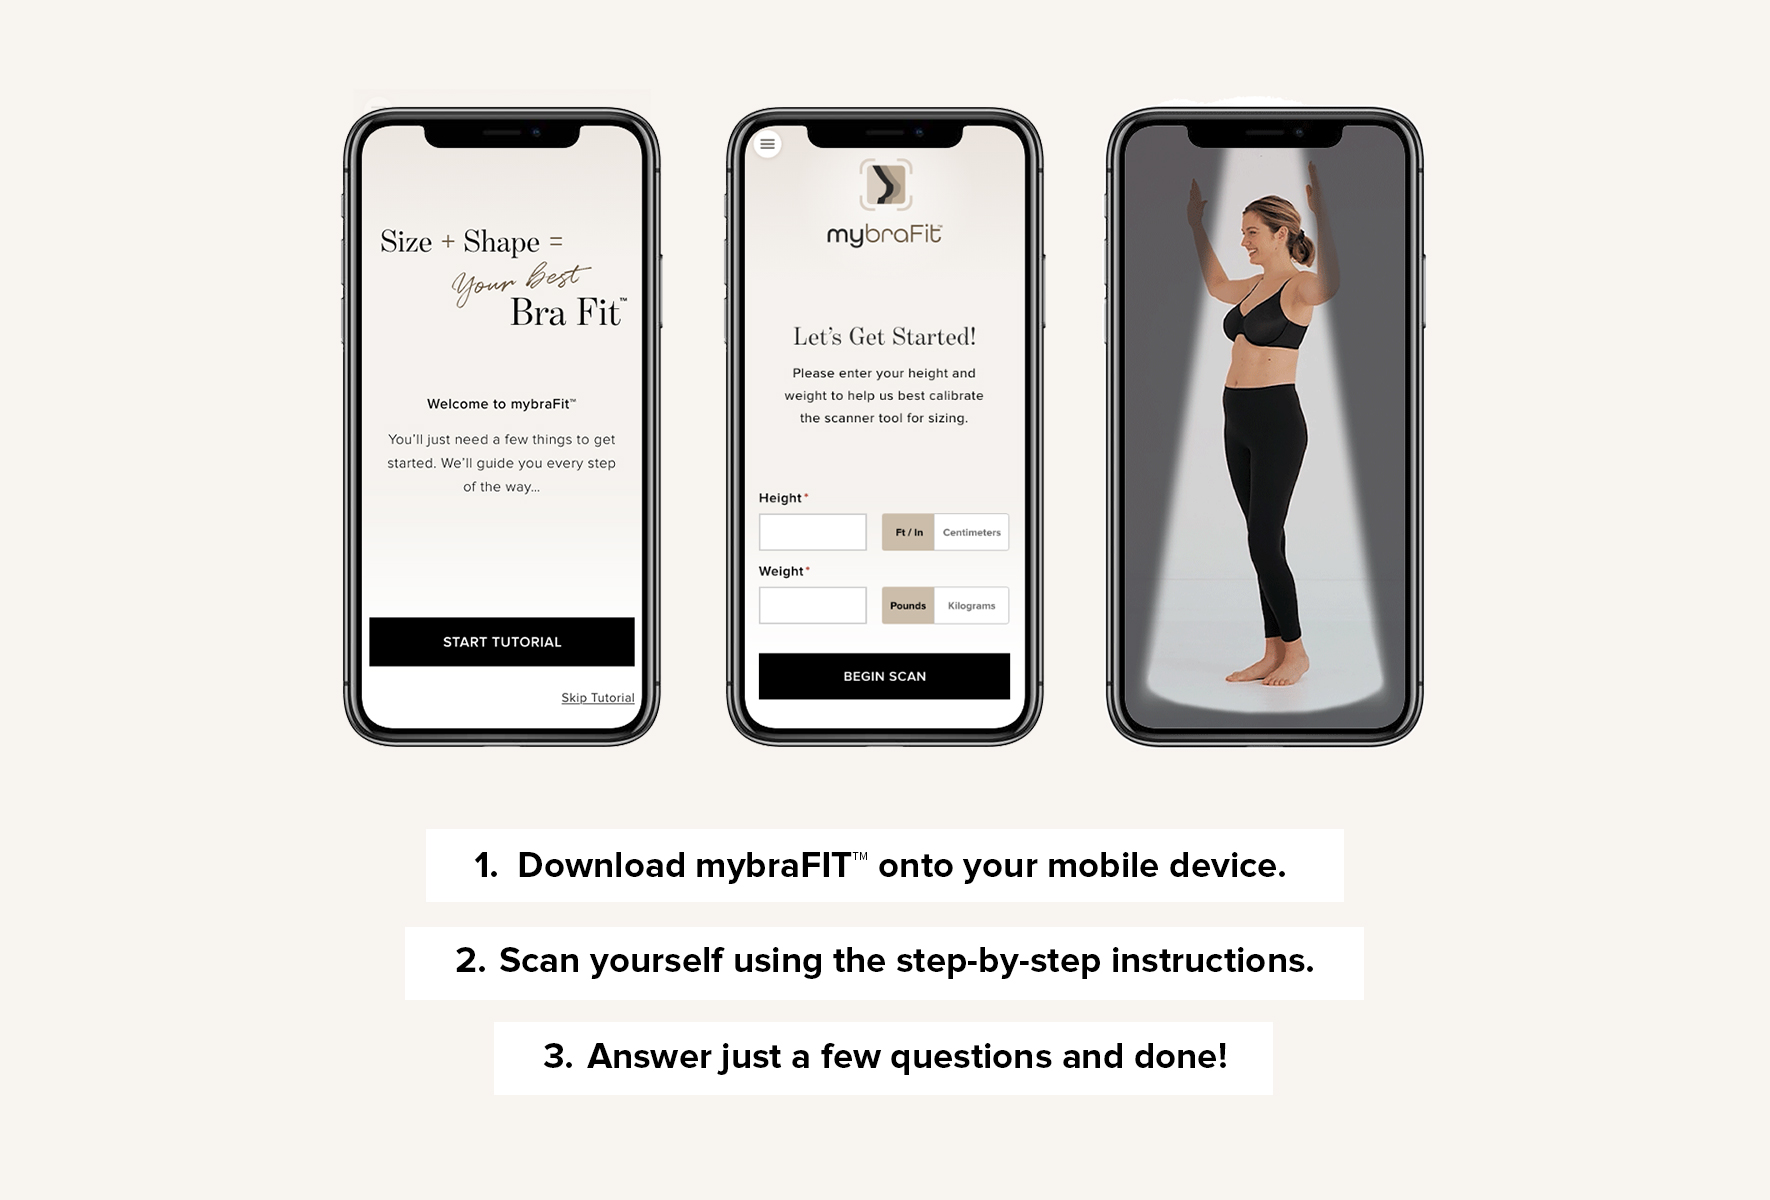 Ready to change your look in an instant? Introducing the new mybraFit™ app.